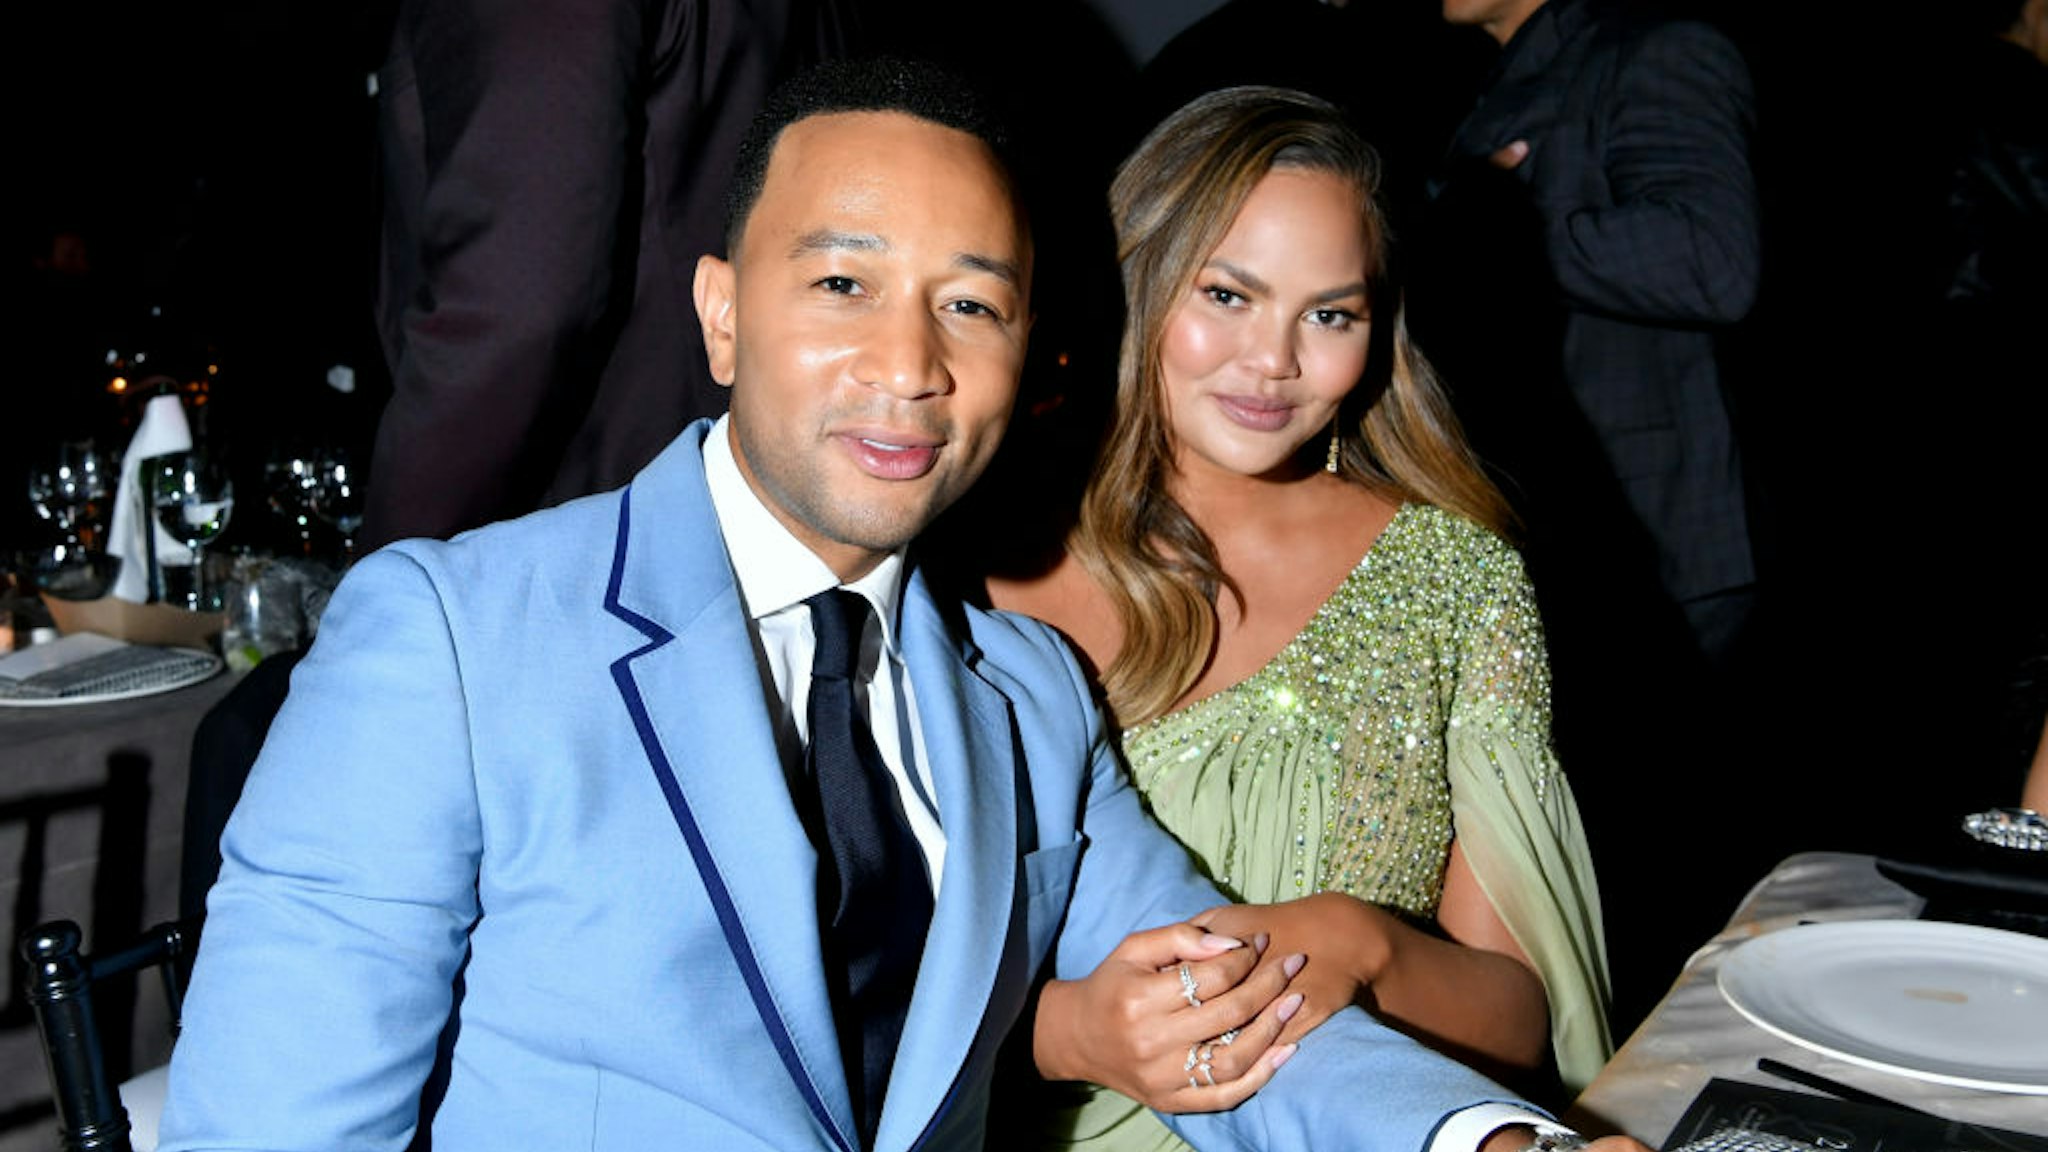 John Legend and Chrissy Teigen attend the 2019 Baby2Baby Gala presented by Paul Mitchell on November 09, 2019 in Los Angeles, California.